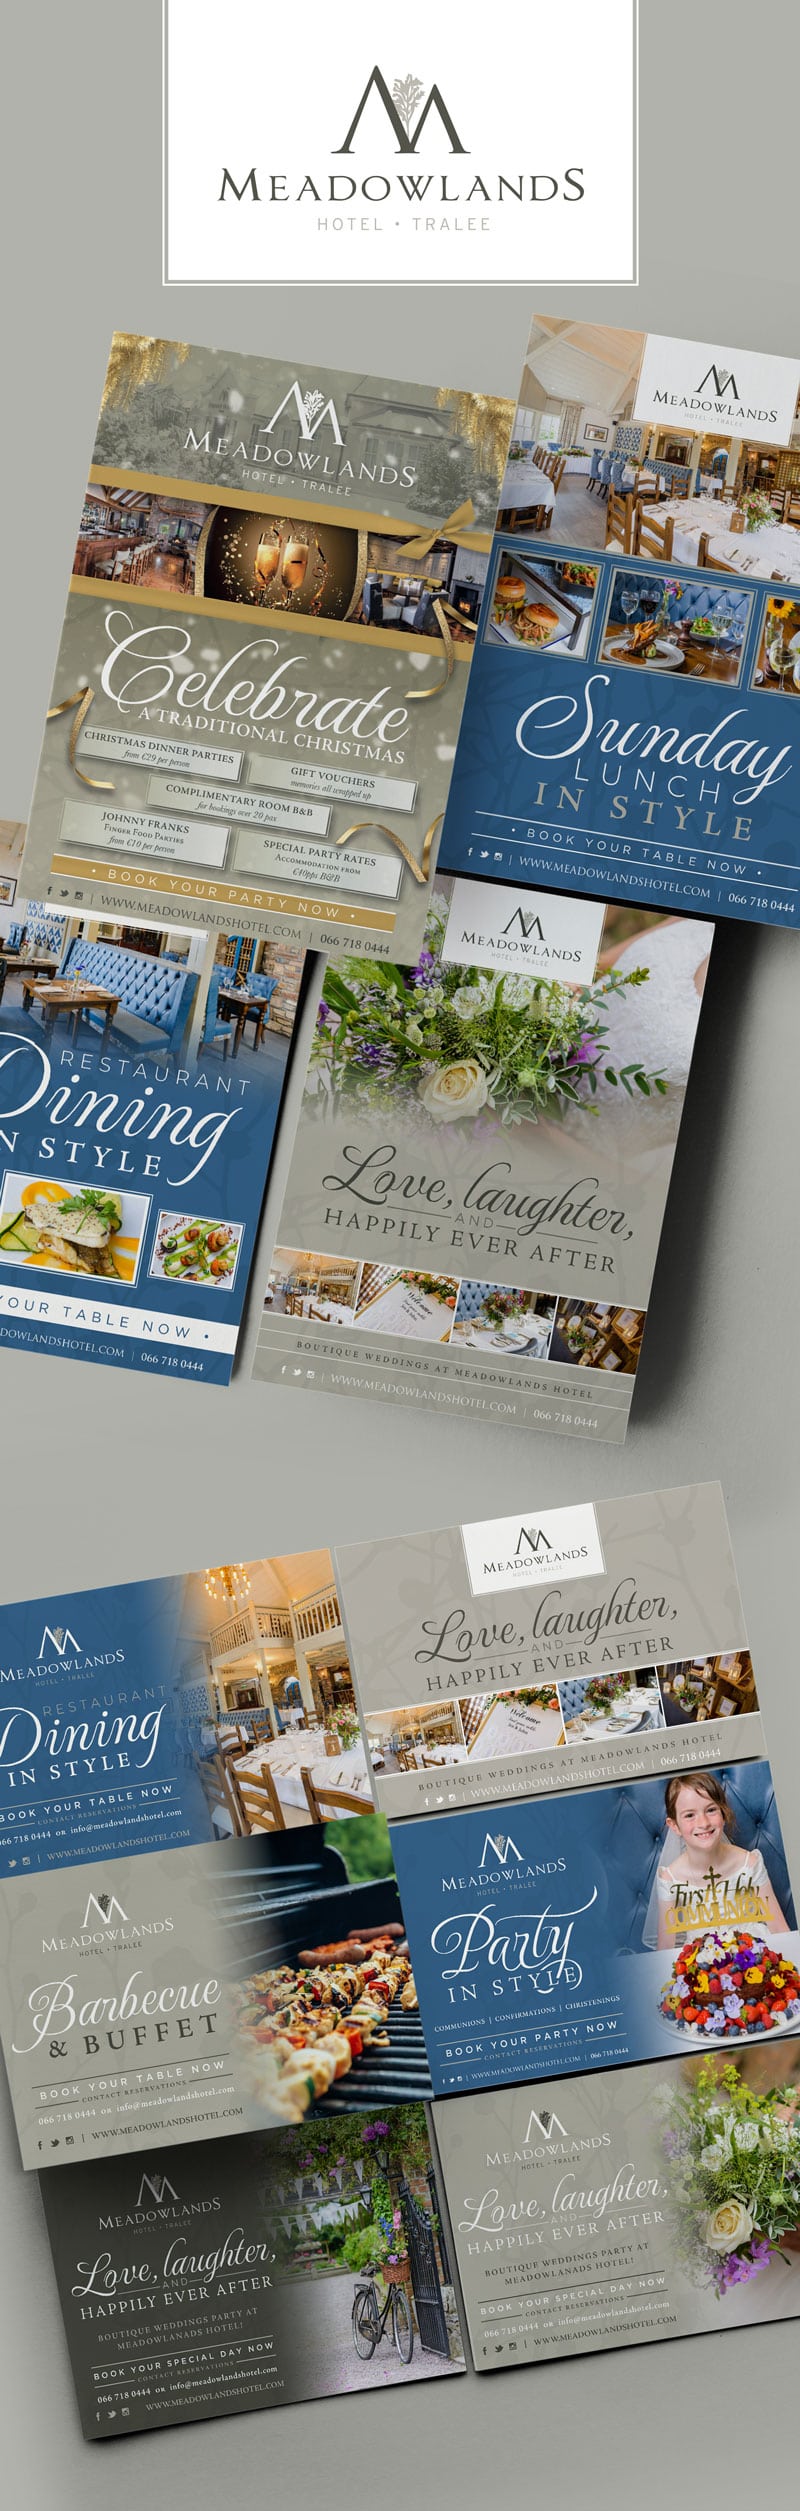 Eye-catching marketing materials by Tralee Printing Works for Meadowlands Hotel, Tralee.